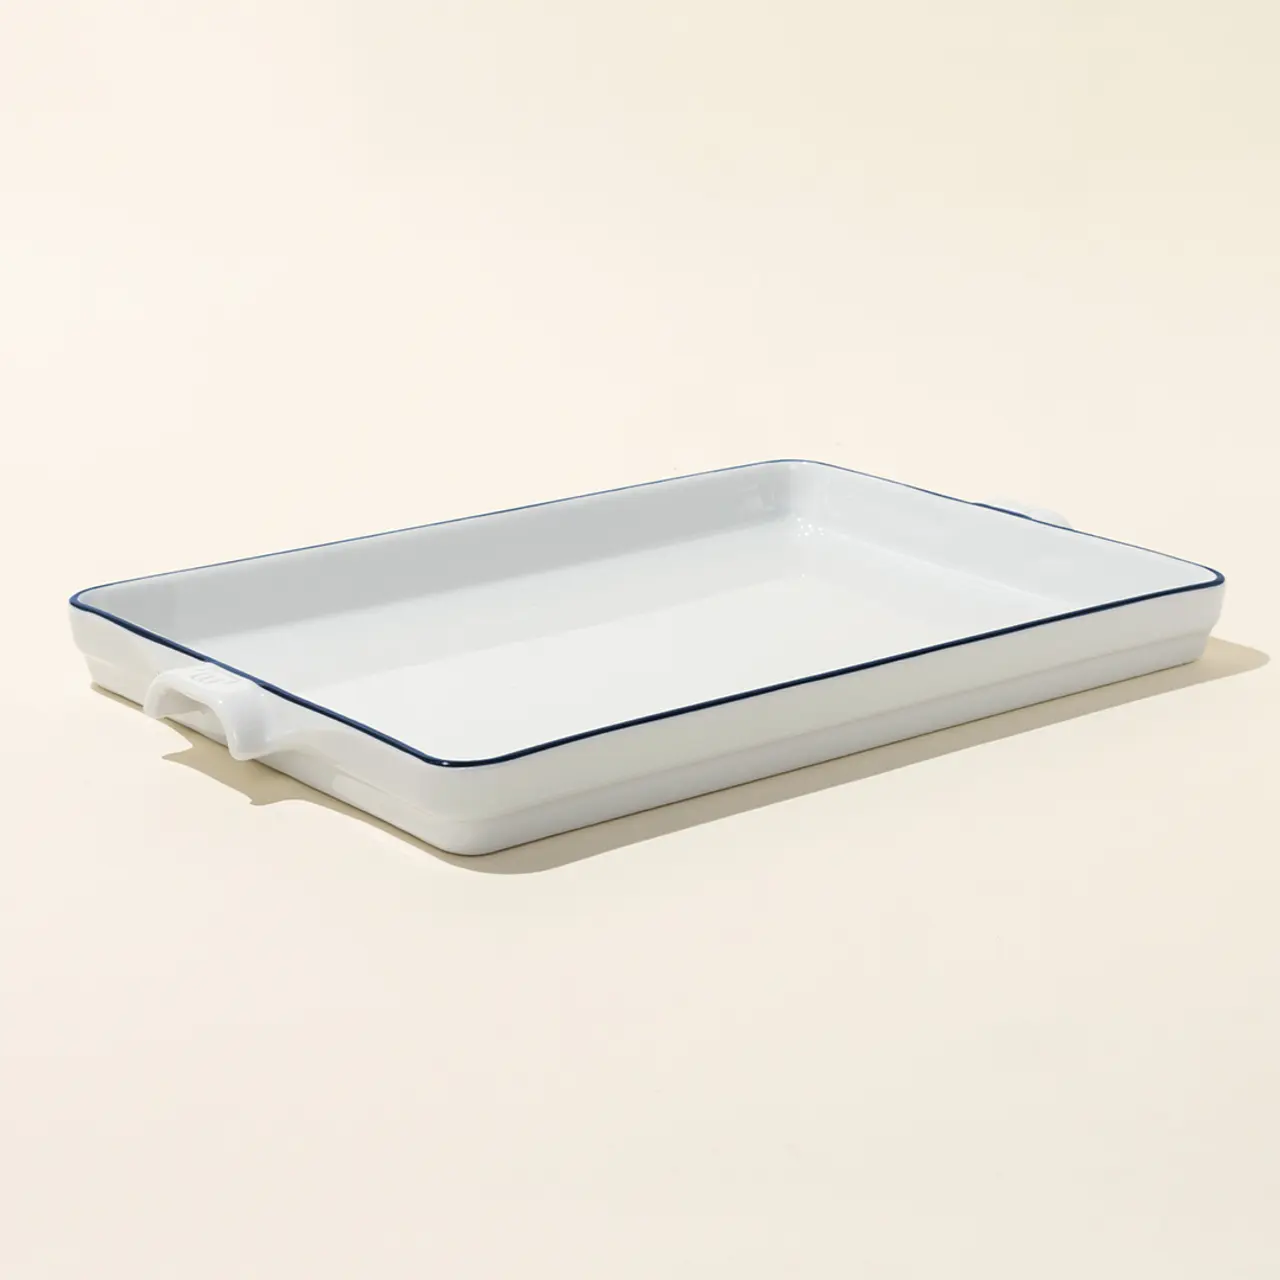 A white ceramic baking dish with blue trim sits on a neutral background.